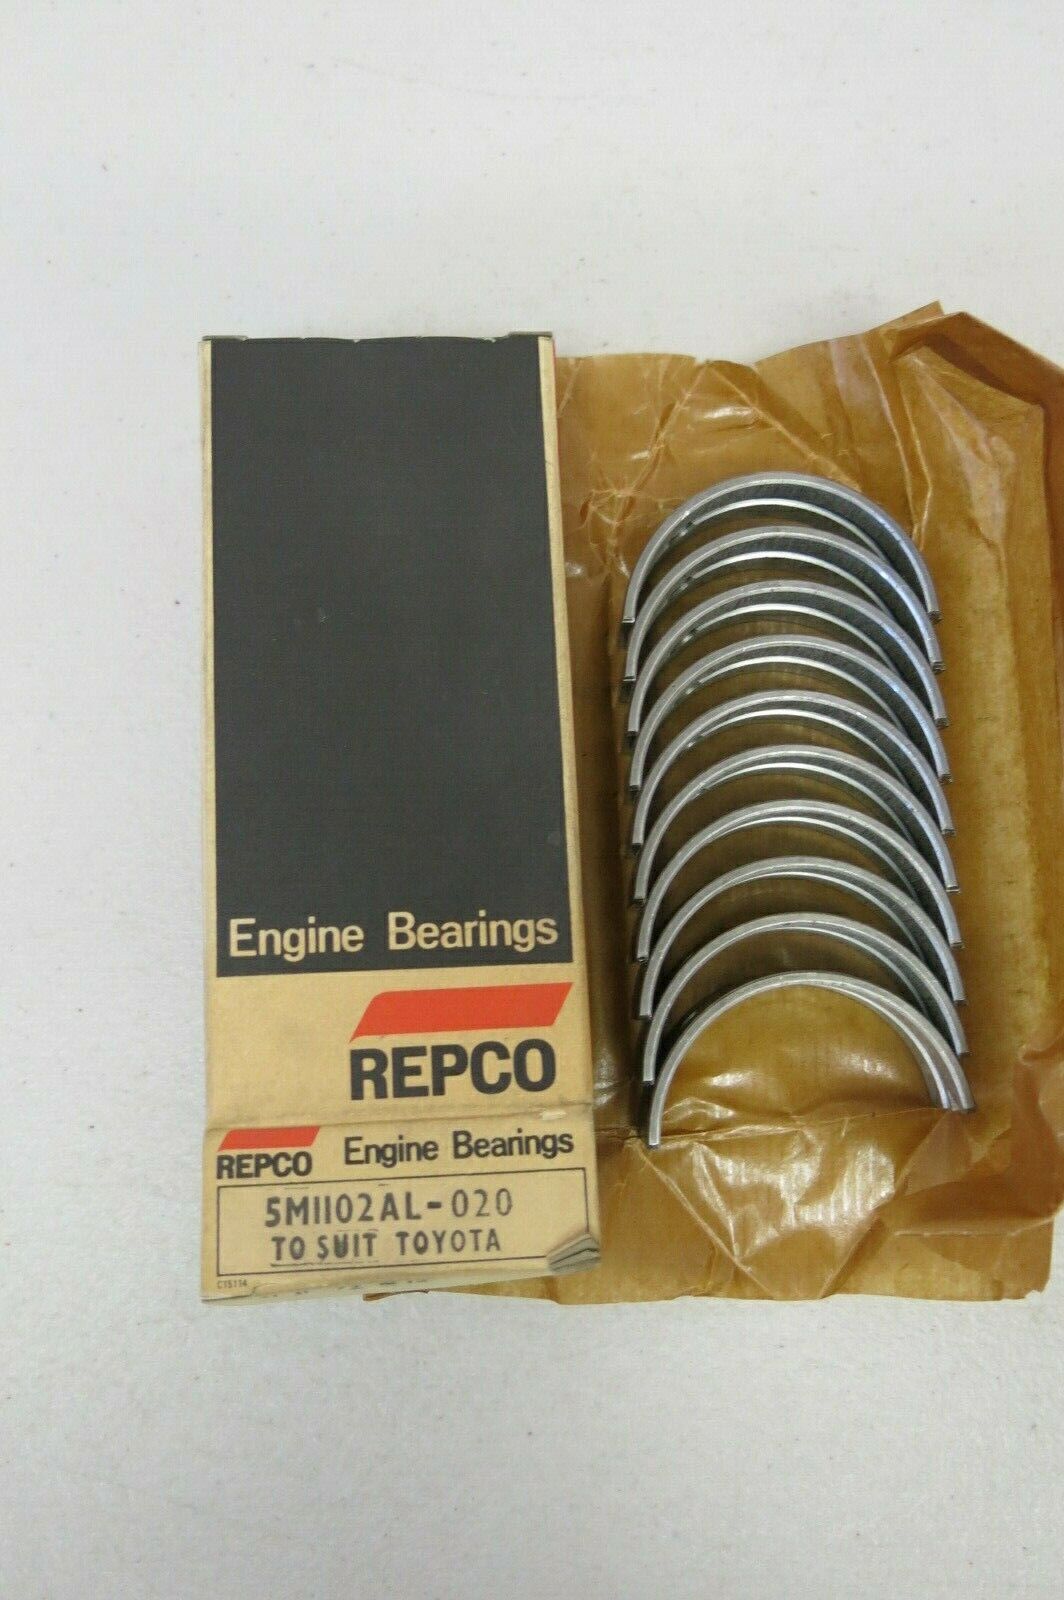 NOS REPCO ENGINE BEARINGS 5M1102AL 020 FITS TOYOTA